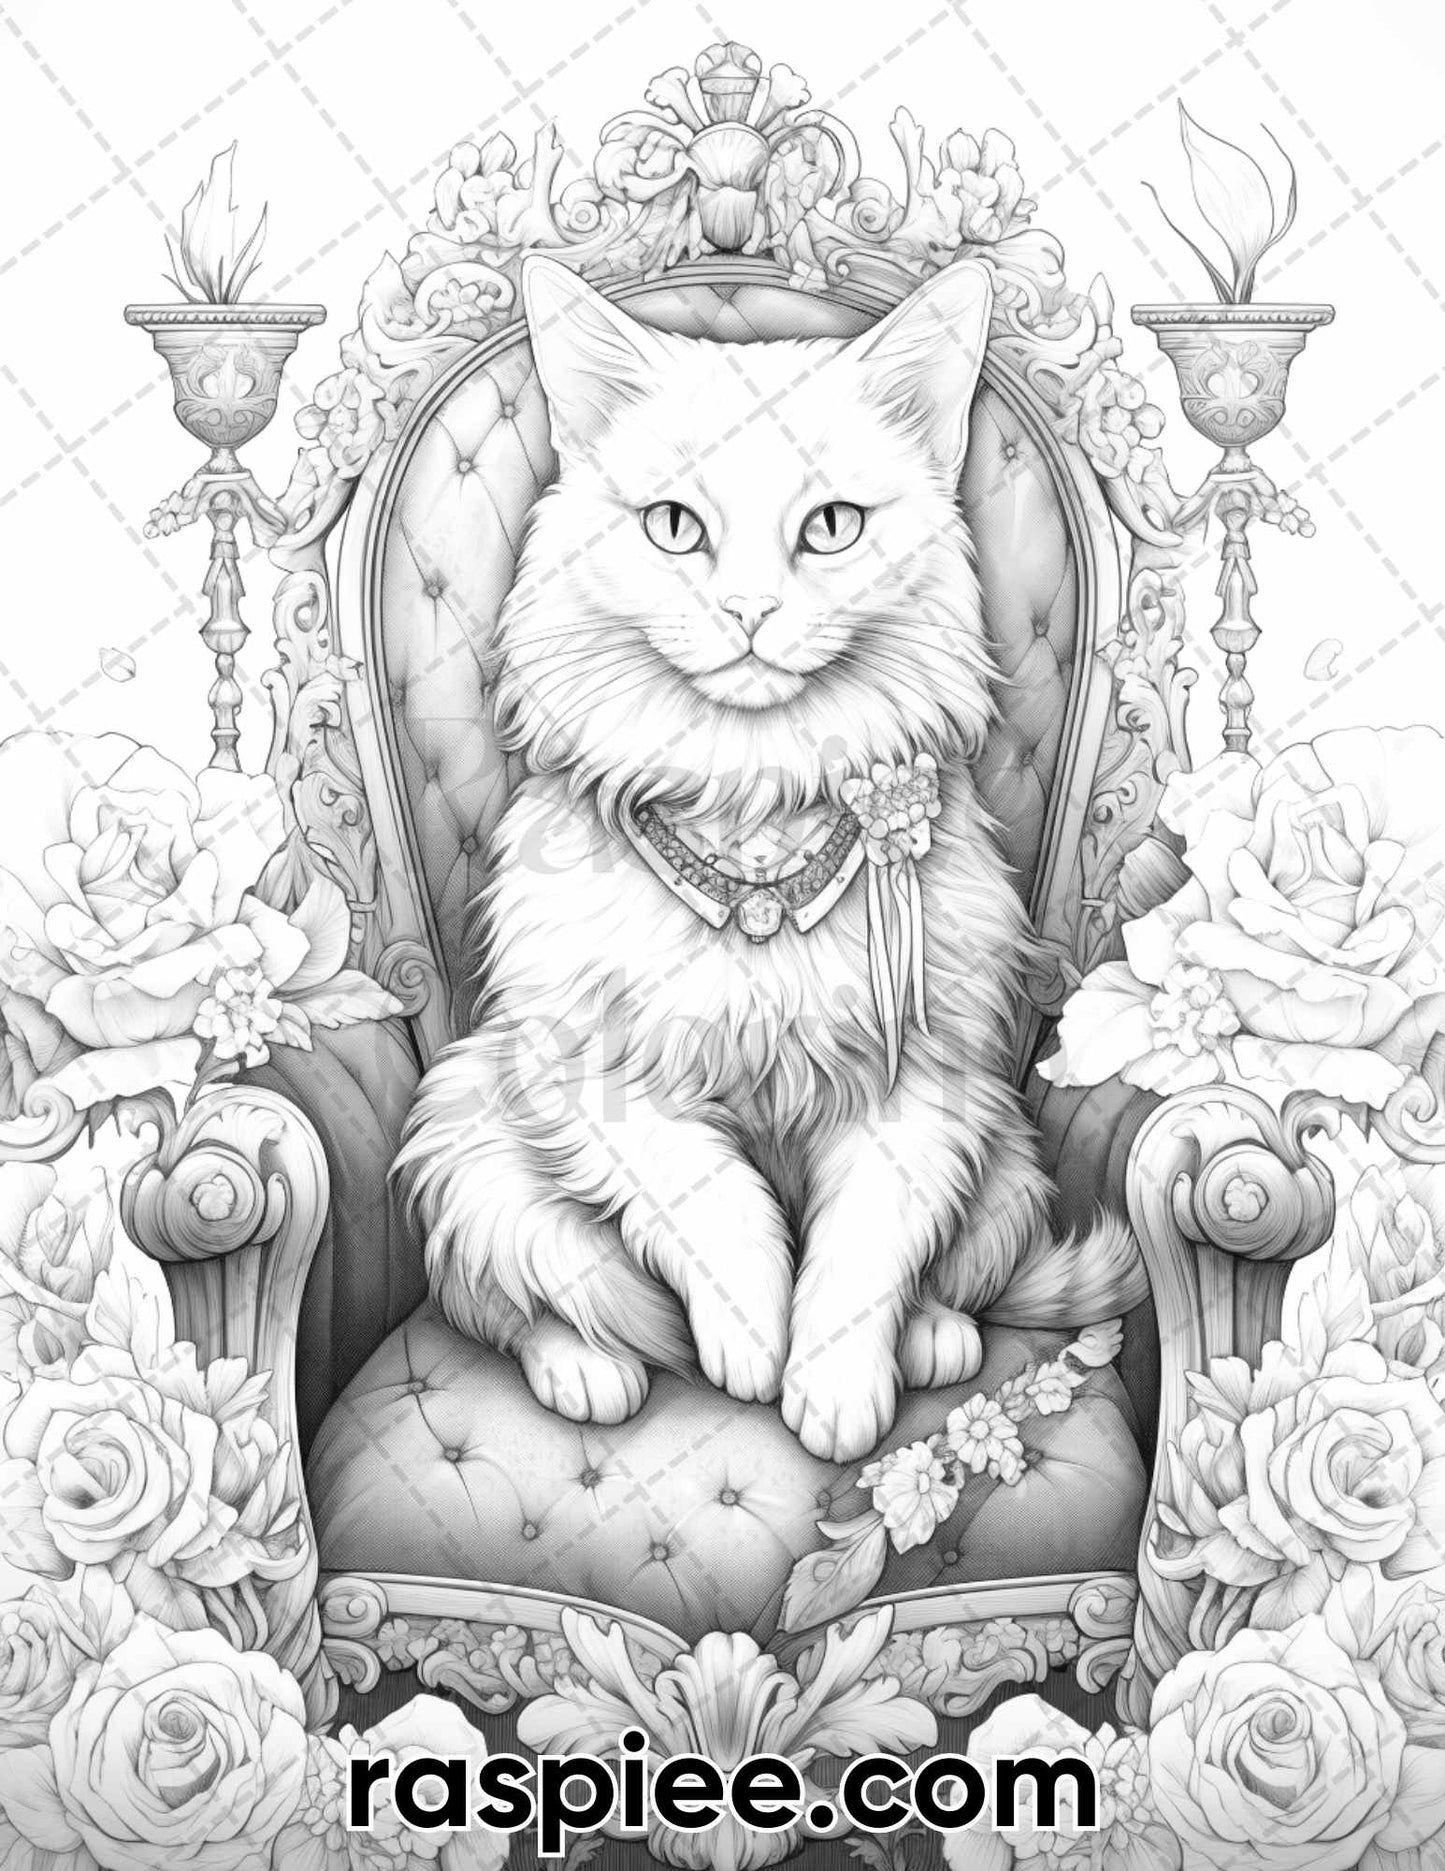 Royal King Cat Coloring Pages, Grayscale Adult Coloring Pages, Cat Lovers Coloring Pages, Animal Coloring Pages for Adults, Animal Coloring Book Printable, Animal Coloring Sheets, Cat Coloring Sheets, Cat Coloring Pages for Adults